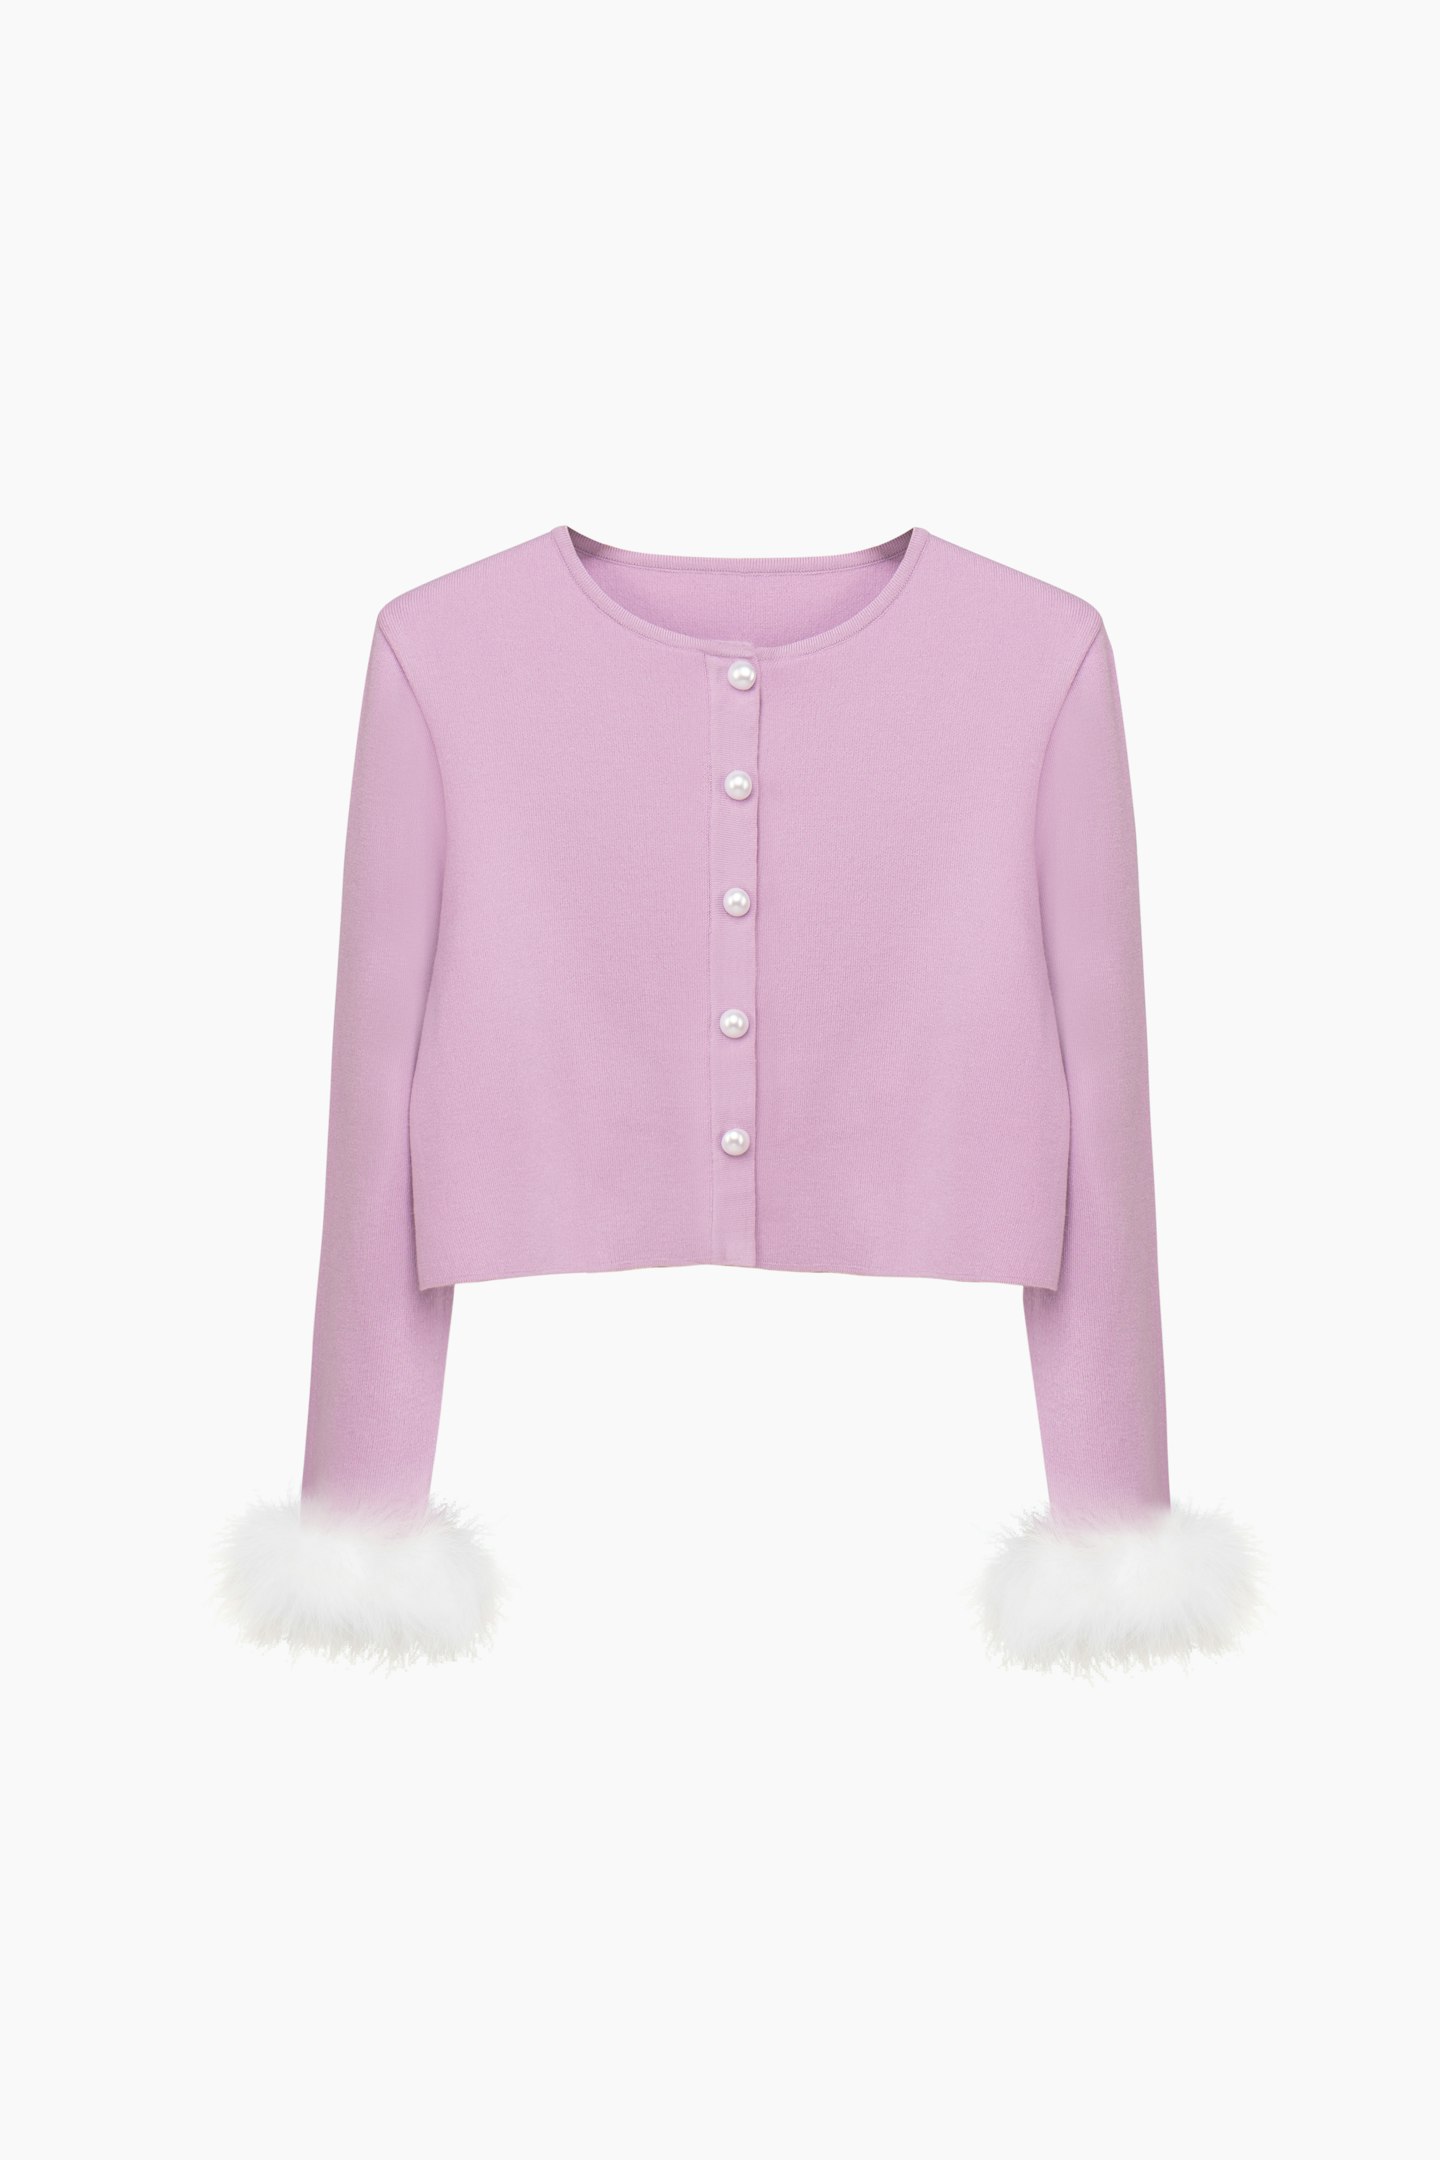 Sleeper, Knitted Cardigan With Detachable Feathers In Lilac, £143